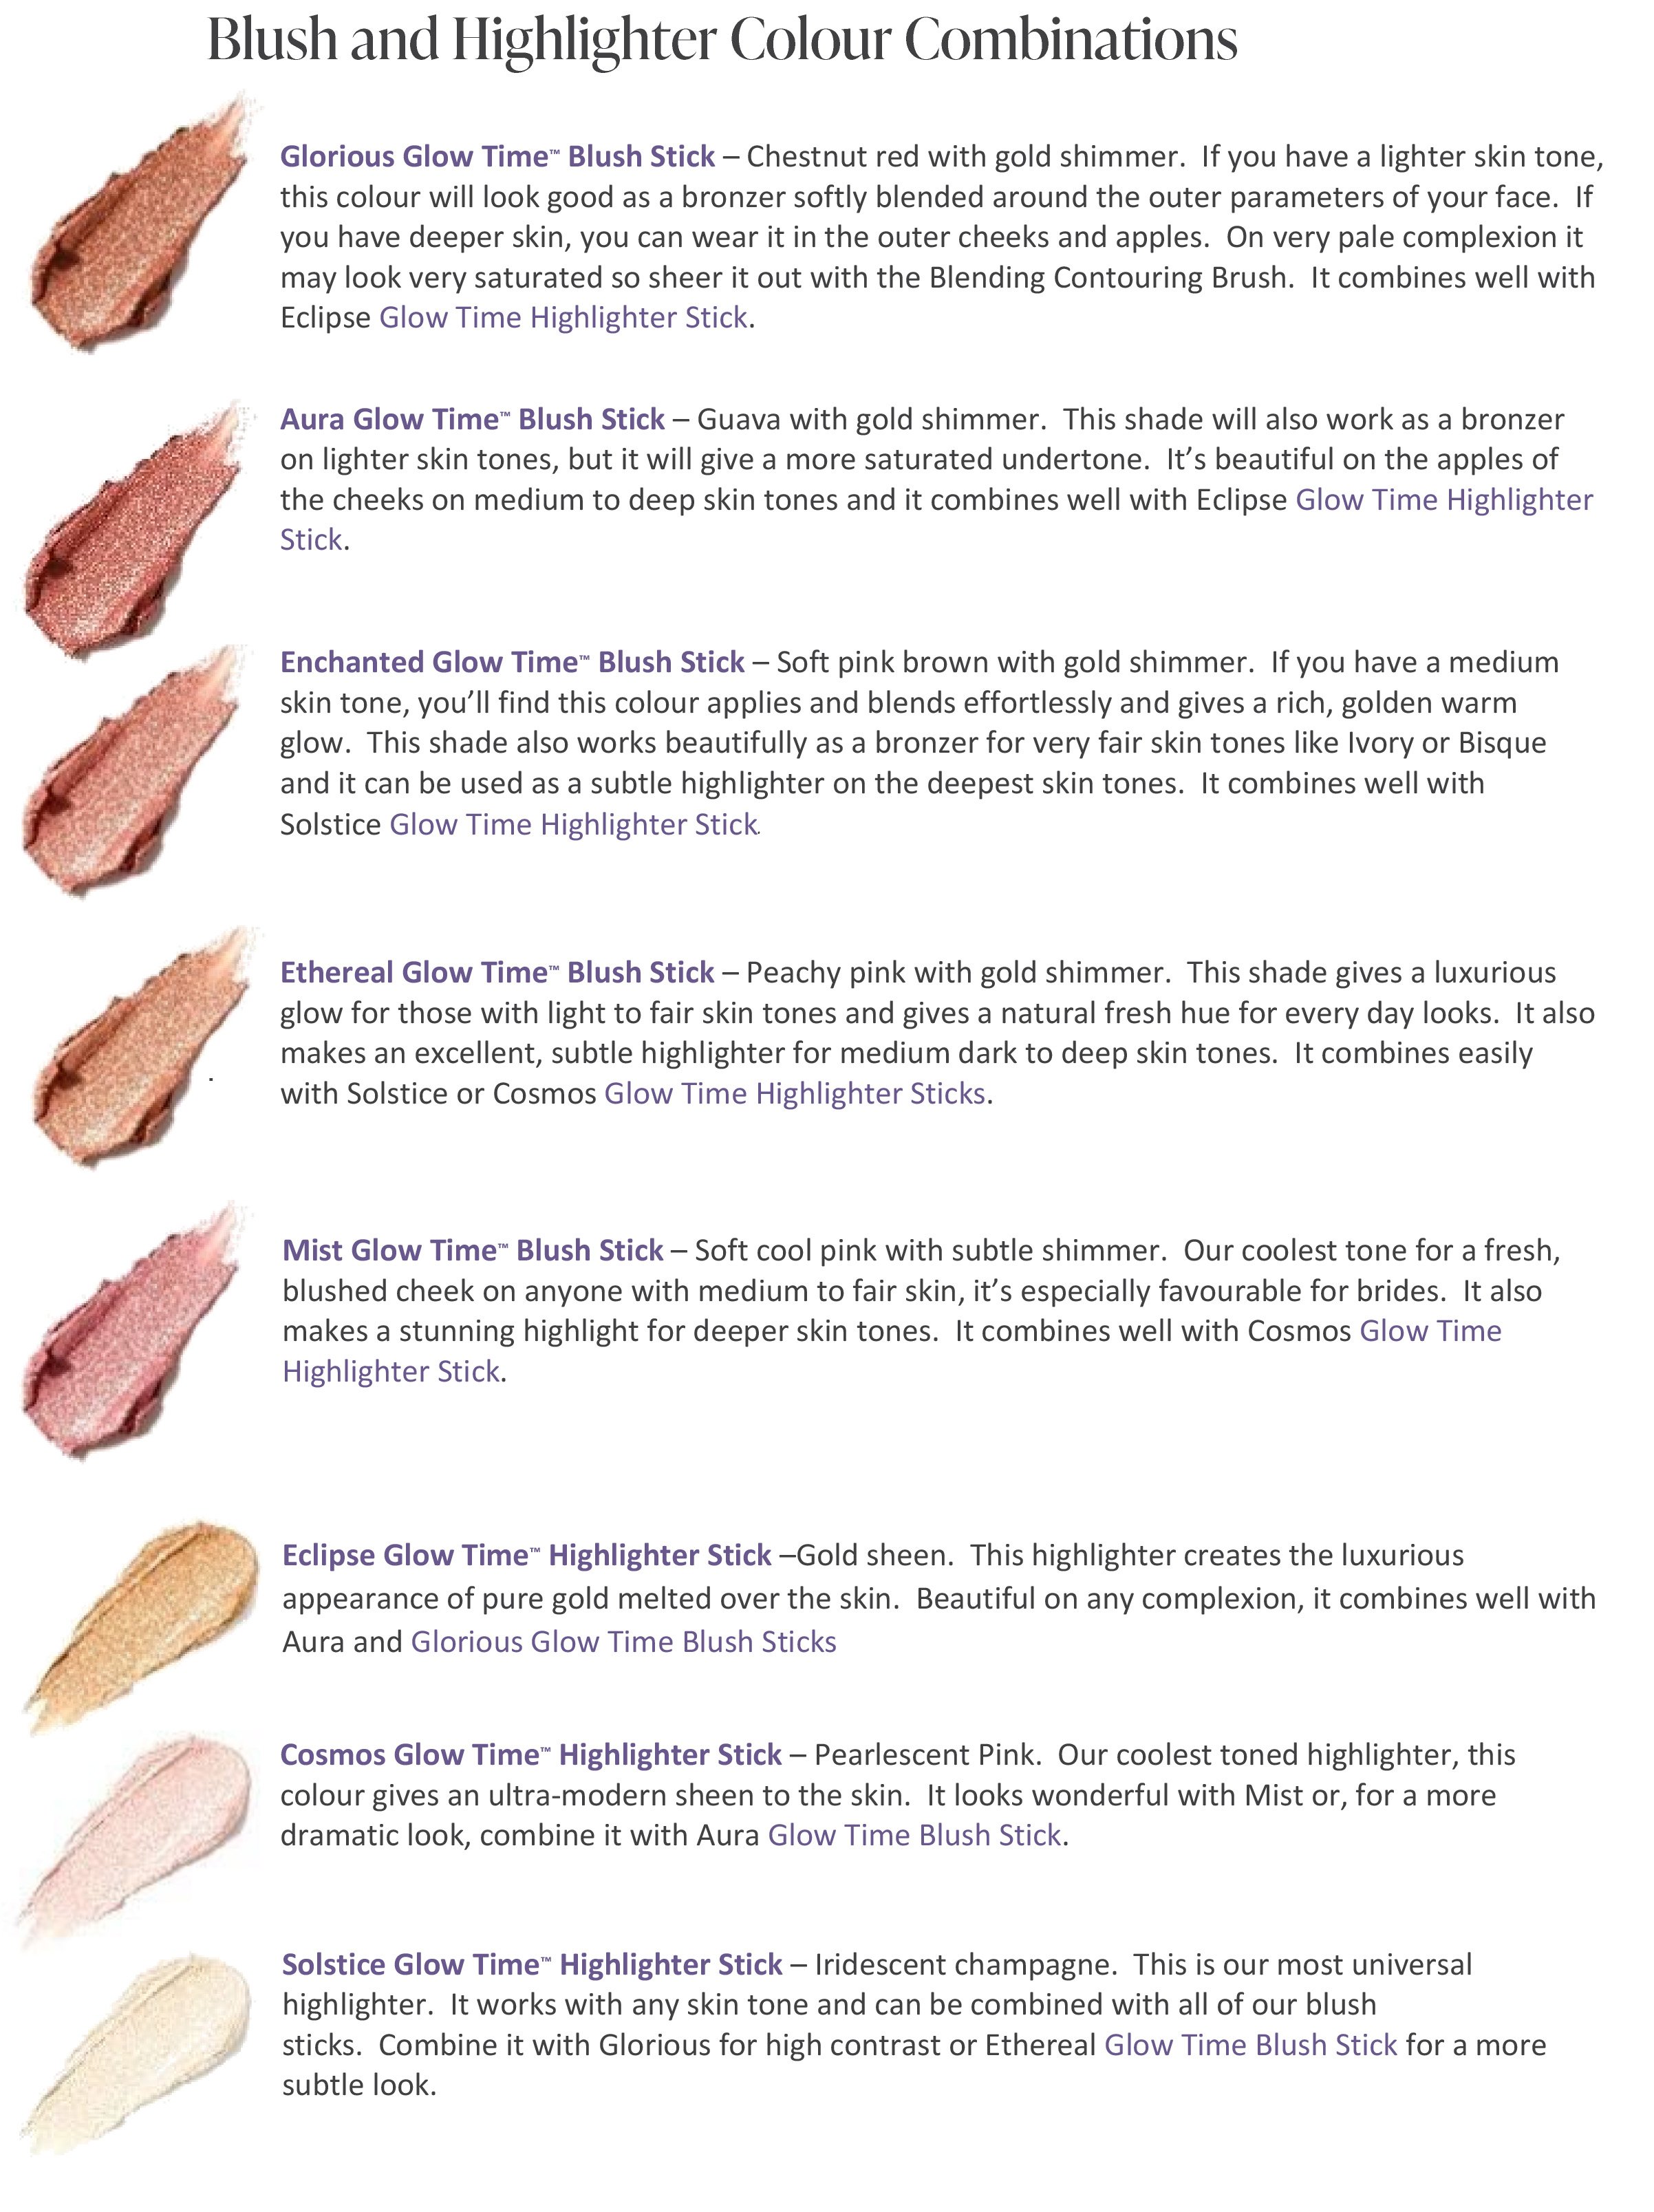 HOW TO CHOOSE YOUR BEST BLUSH3-2.jpg